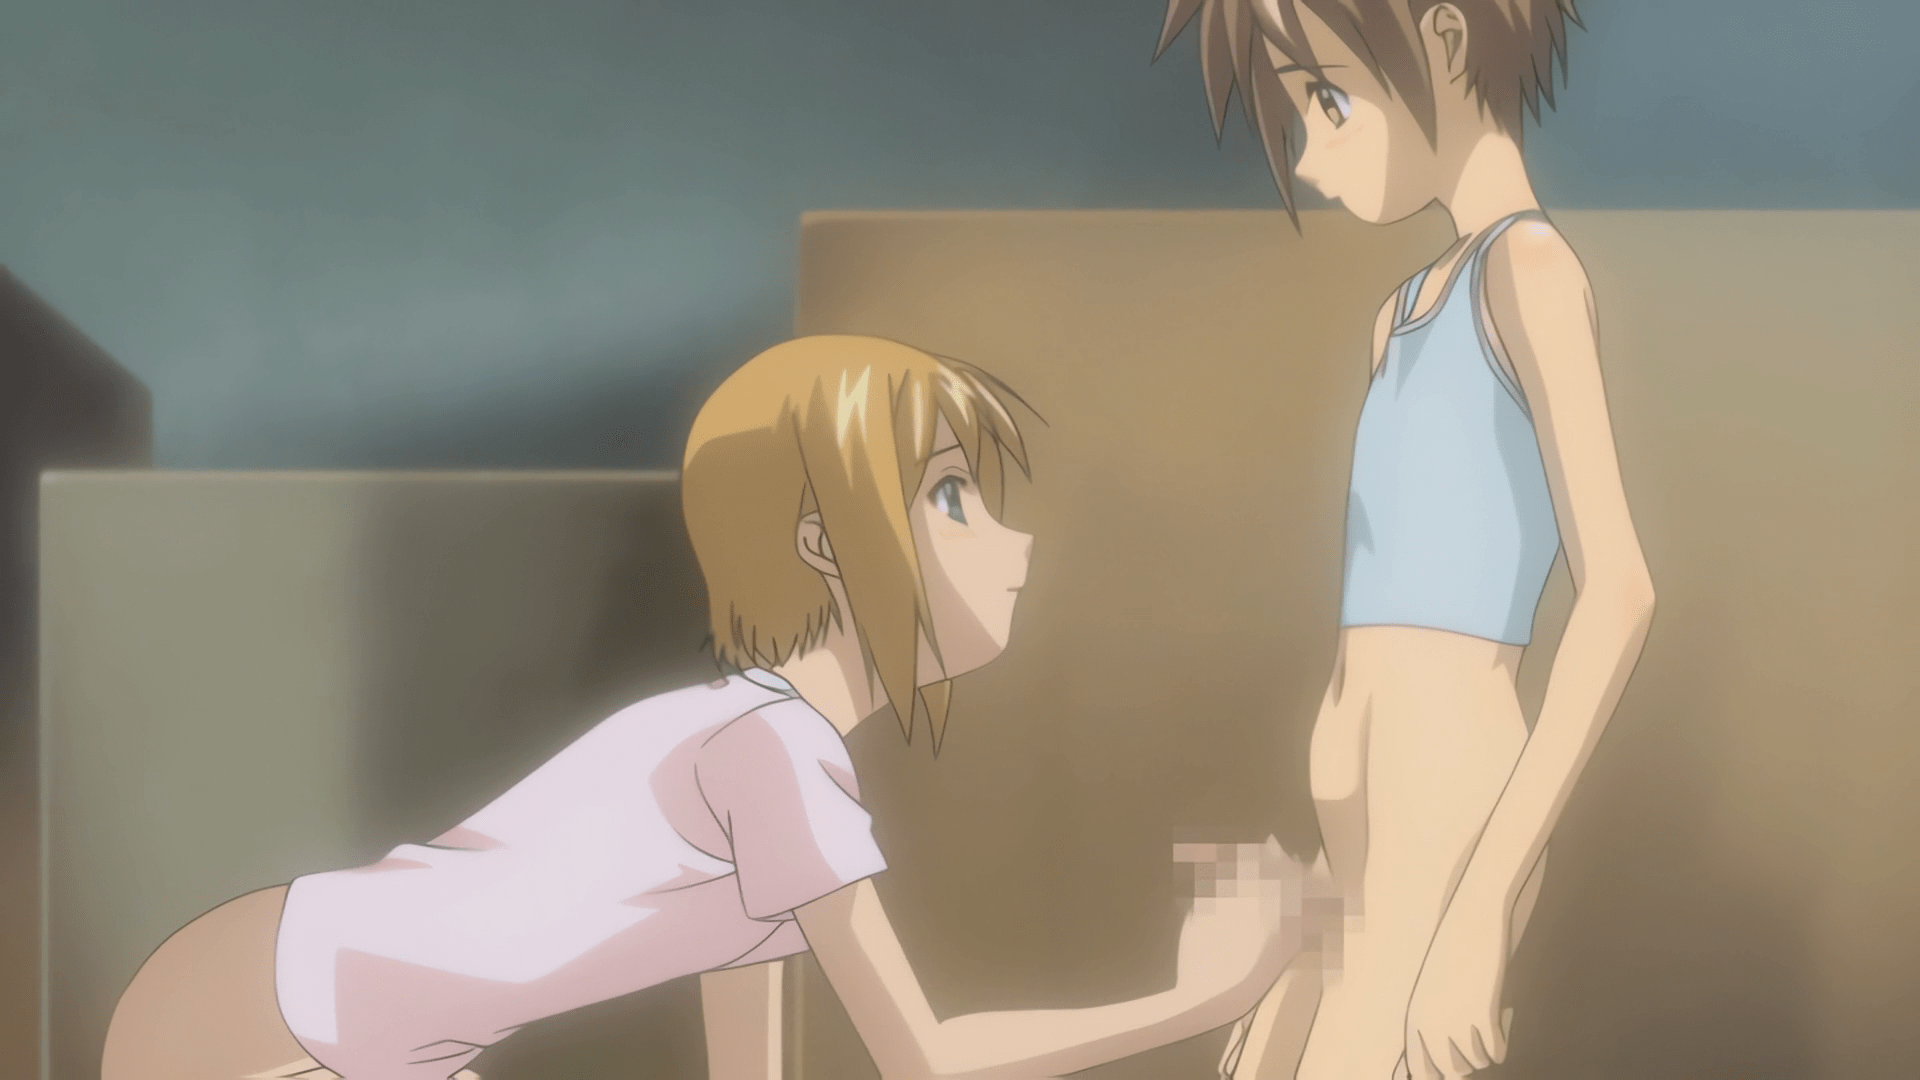 thumbnail for Boku no Pico 2 on oppai.stream, all your anime hentai needs in one place